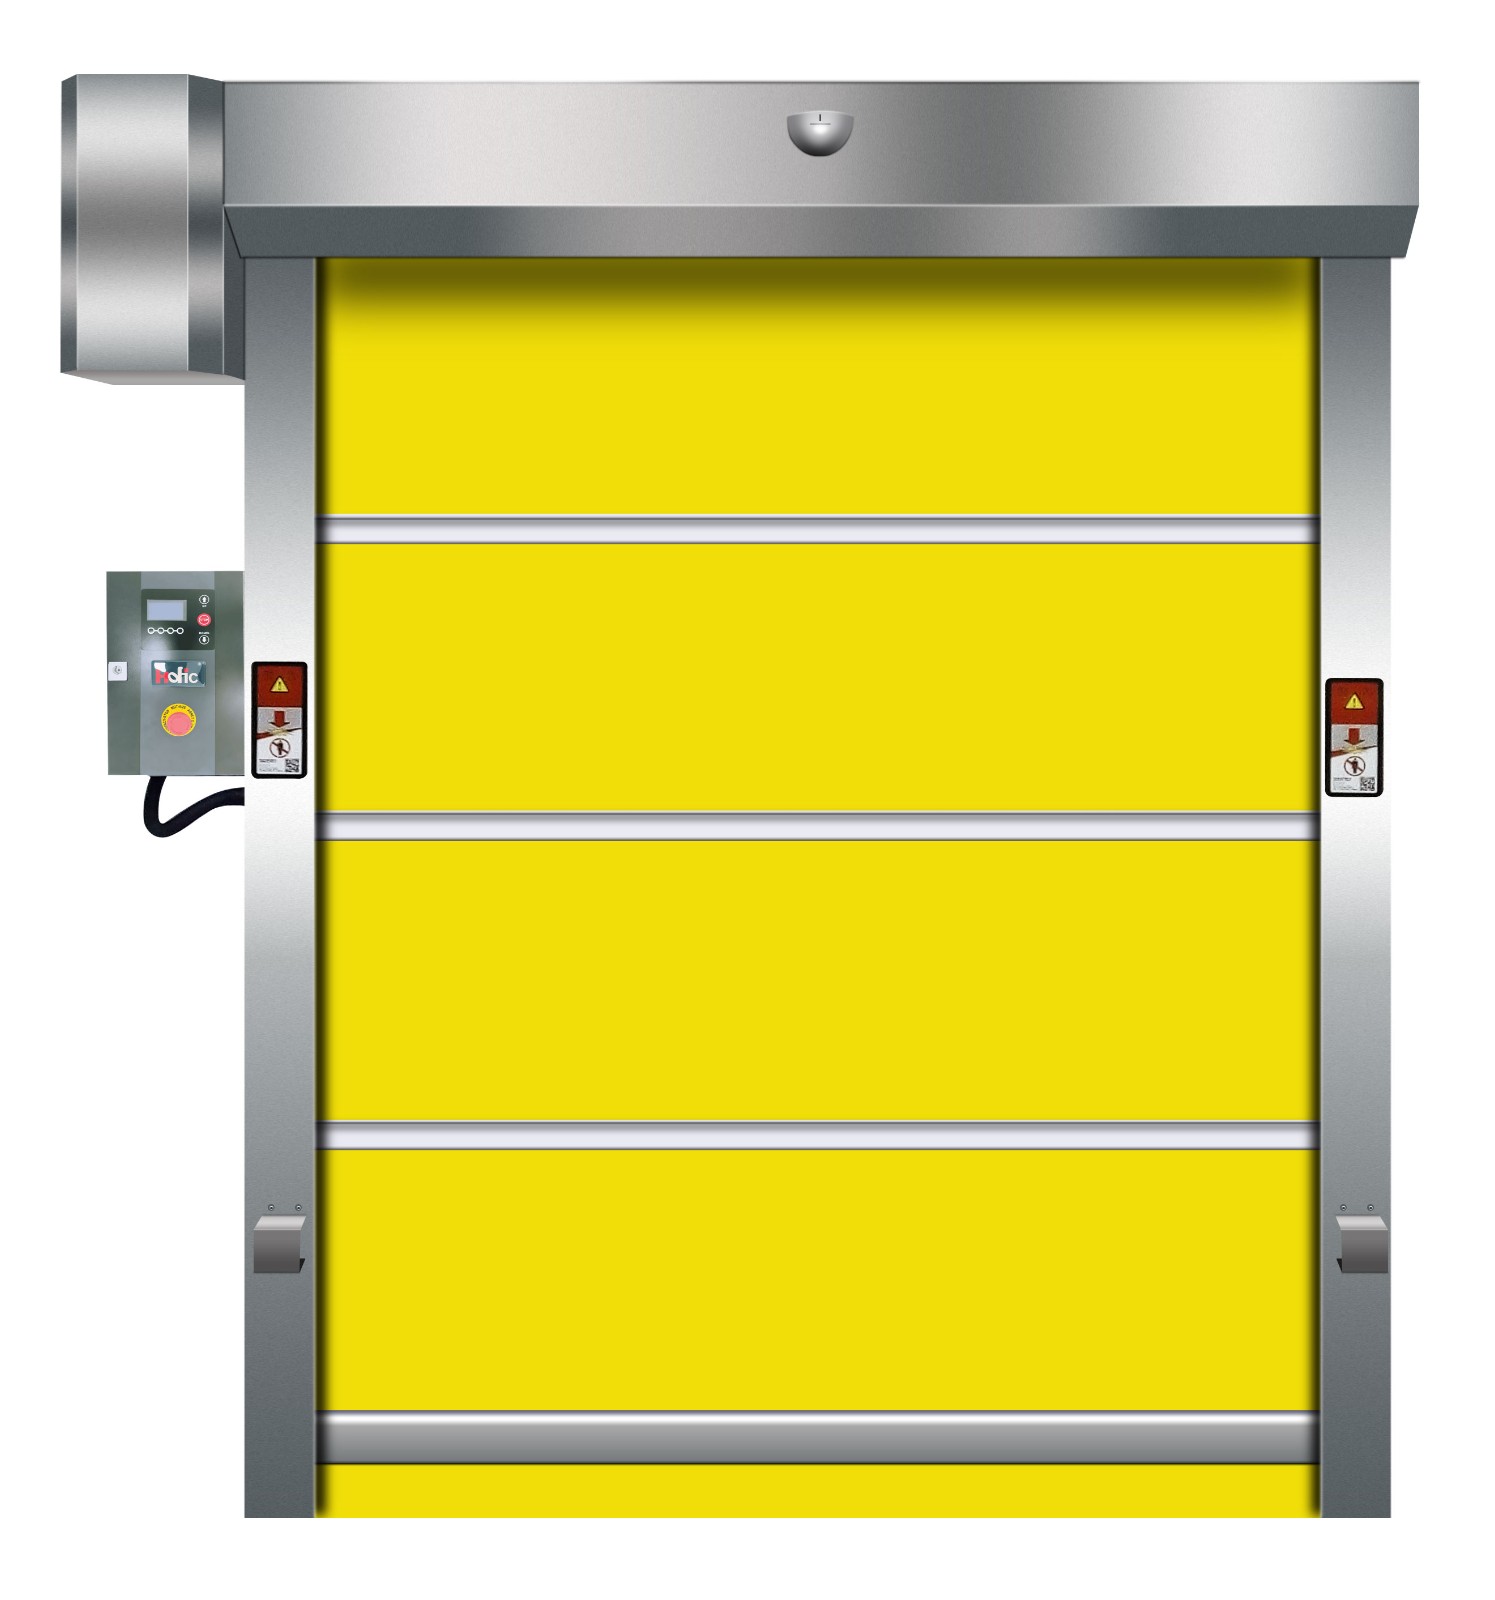  PVC high speed spiral door used in Logistics